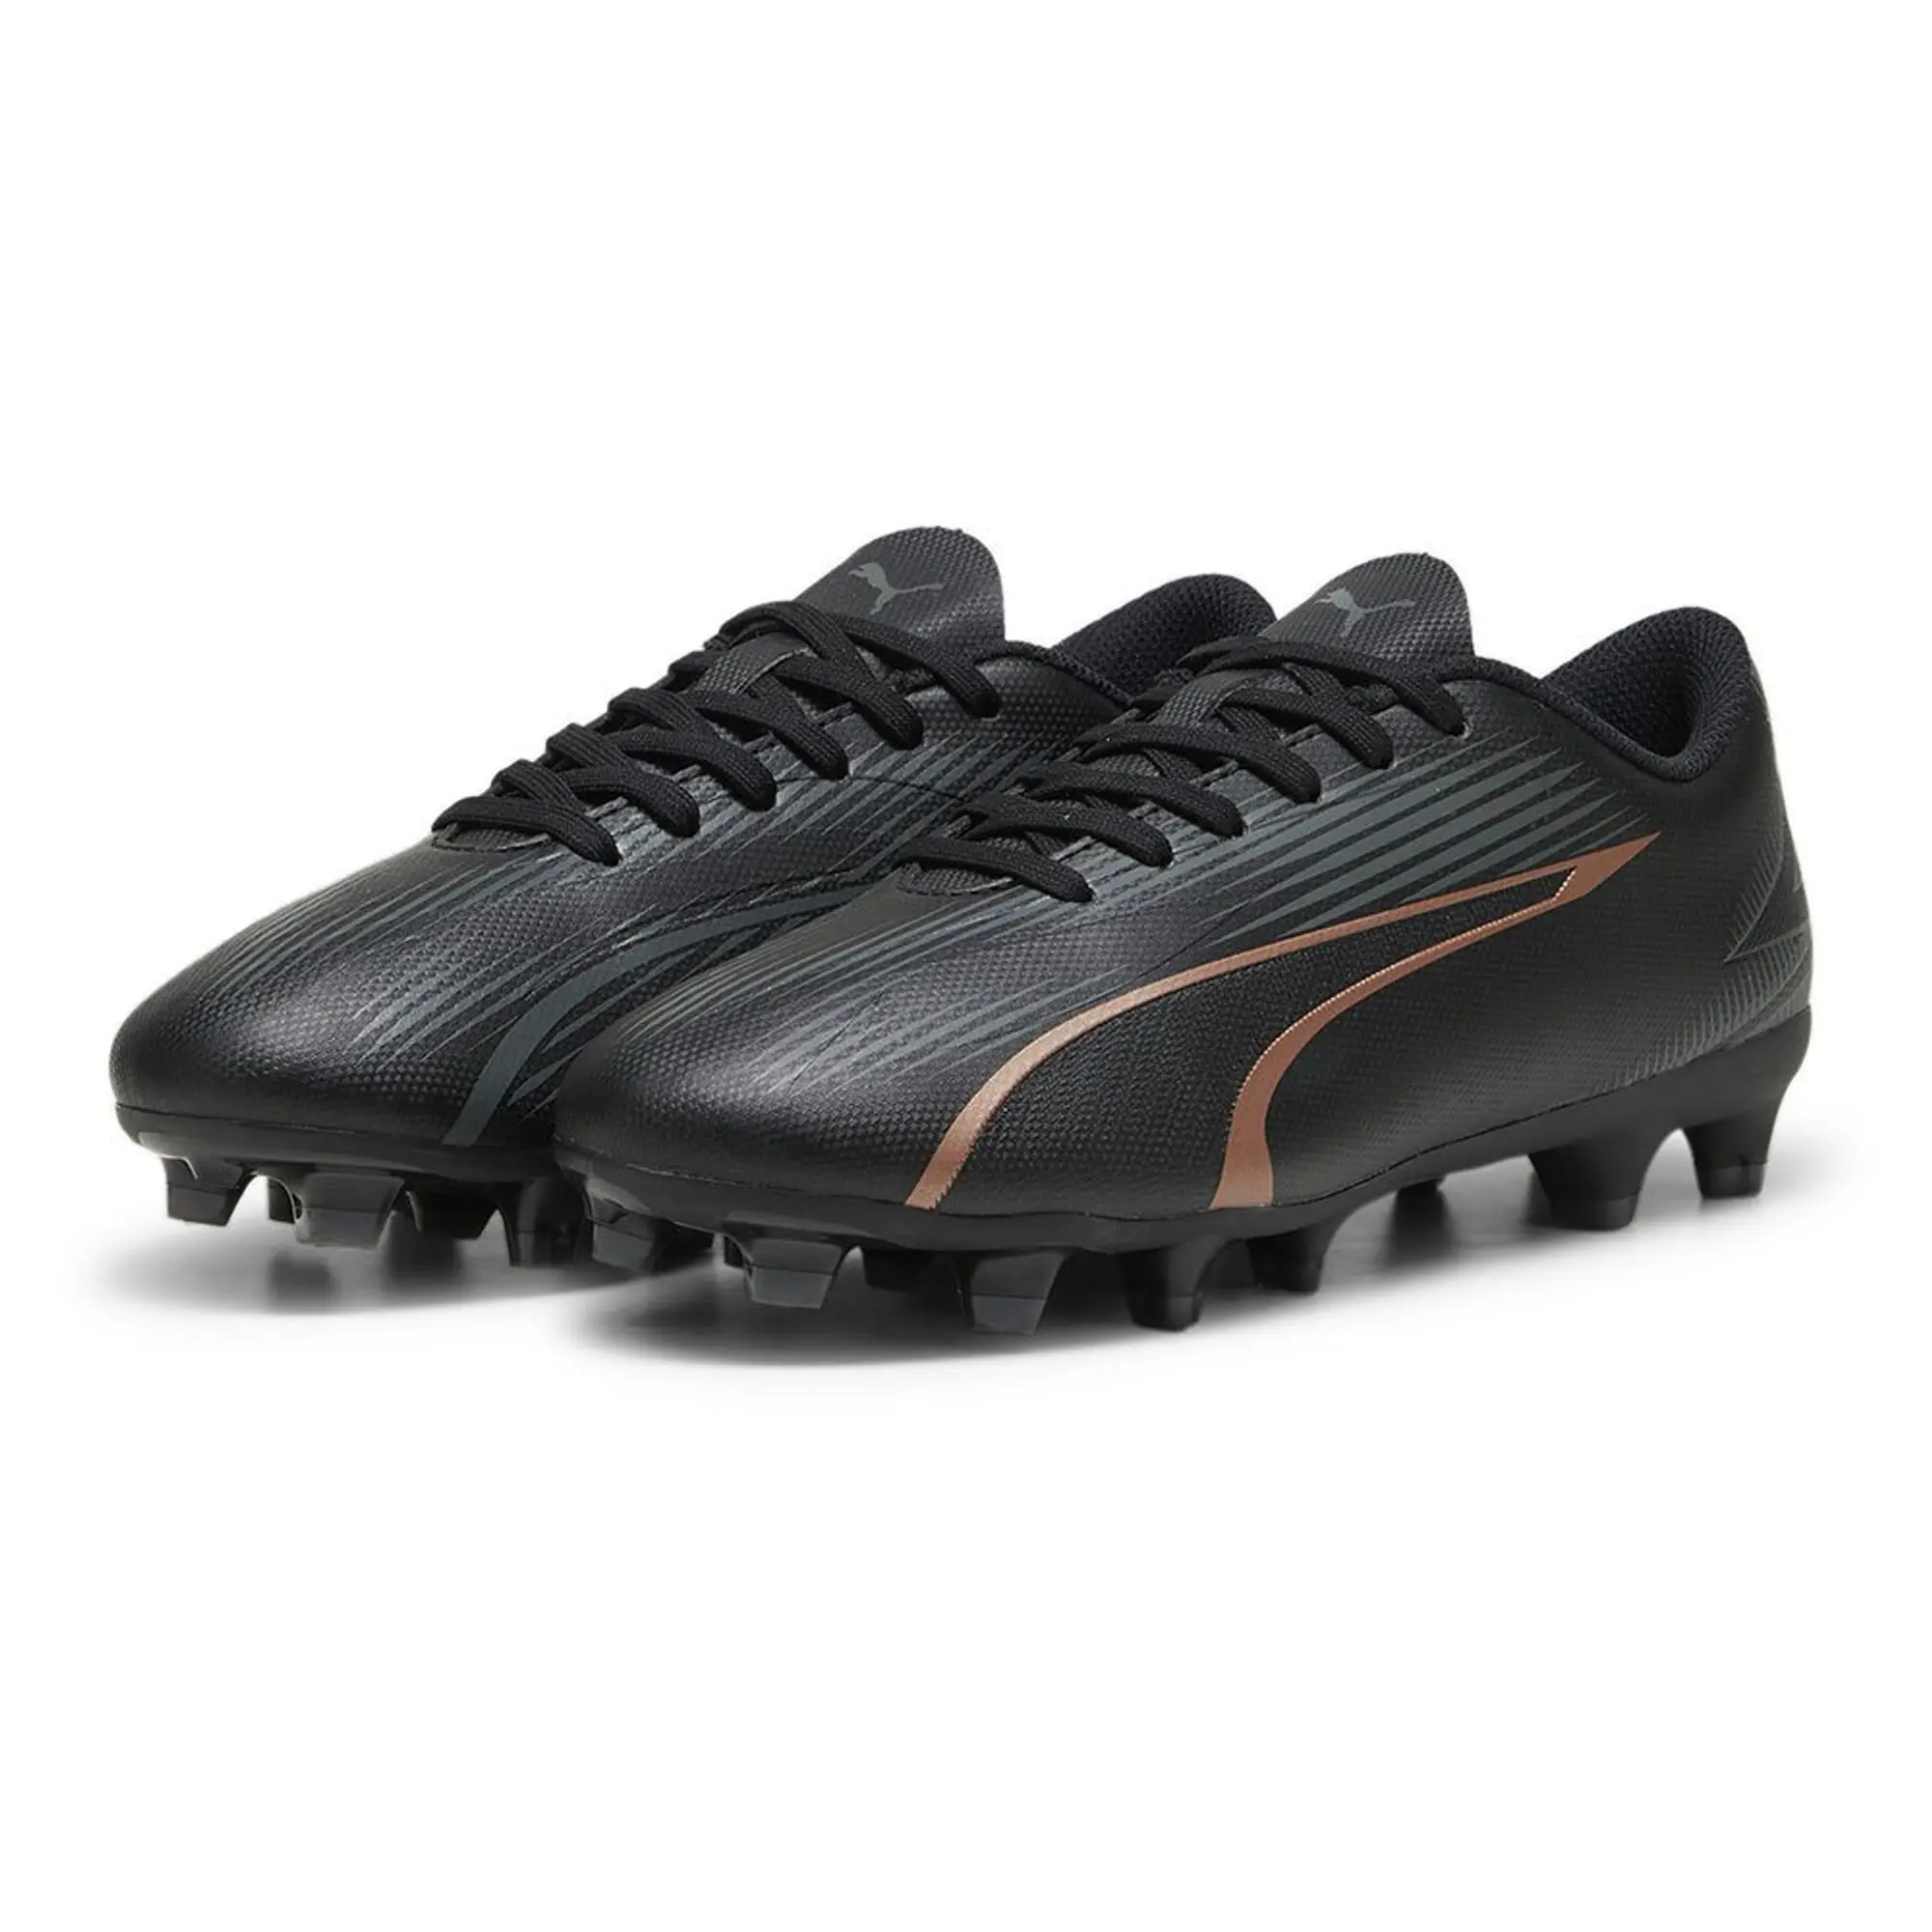 PUMA Ultra Play FG/AG Youth Football Boots, Black/Copper Rose